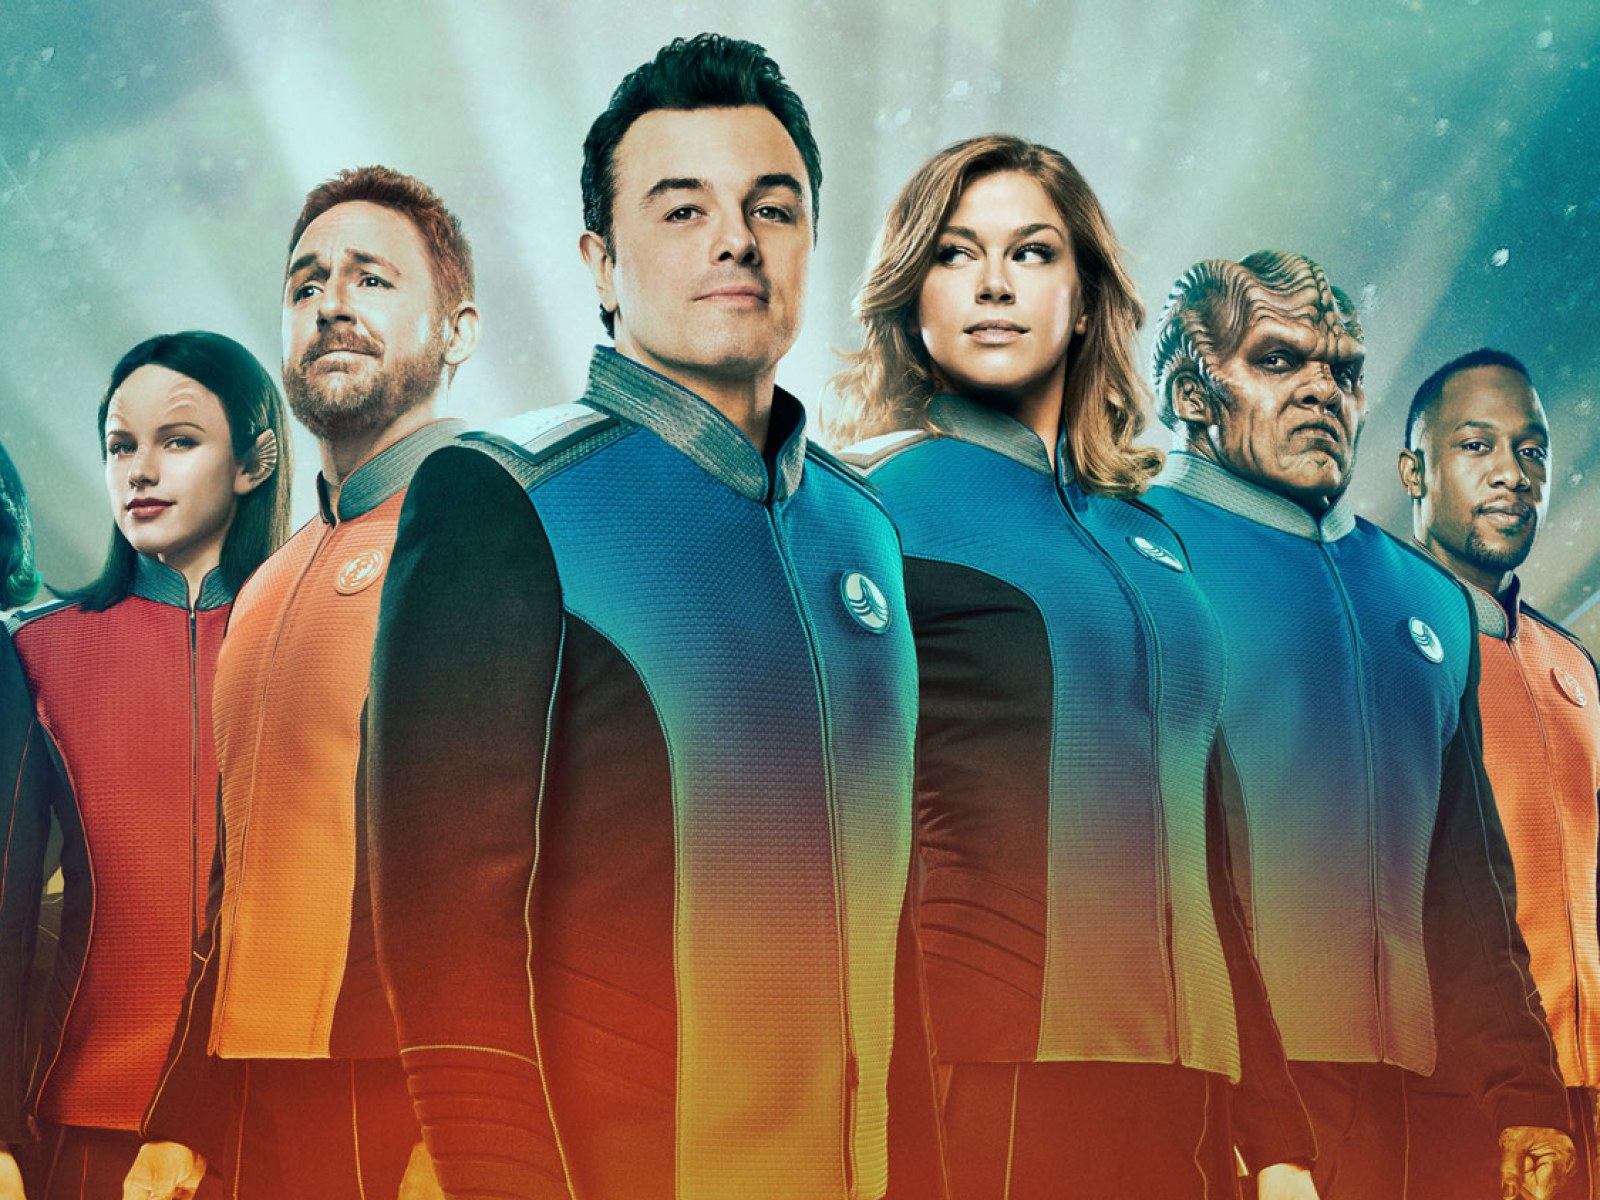 Will There Be Another Season of 'The Orville'?